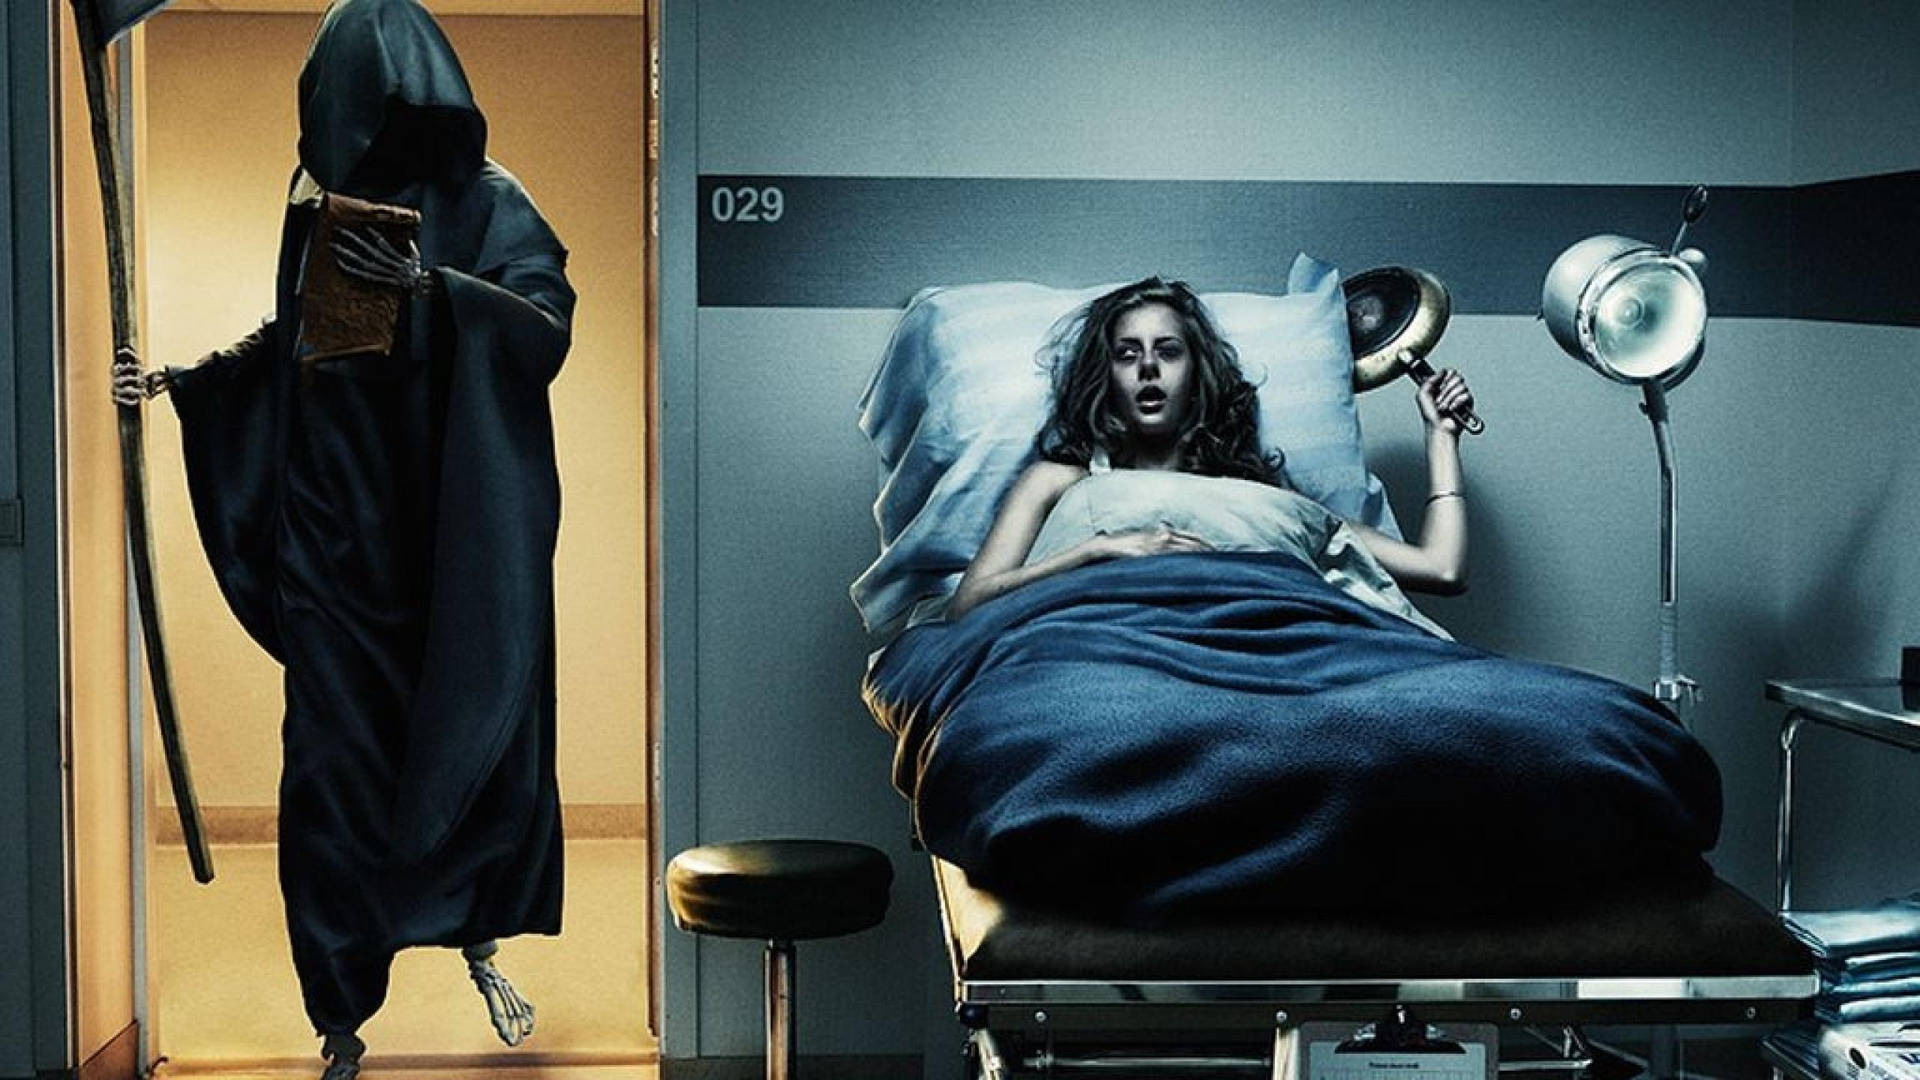 Grim Reaper With Girl In Hospital Bed Wallpaper